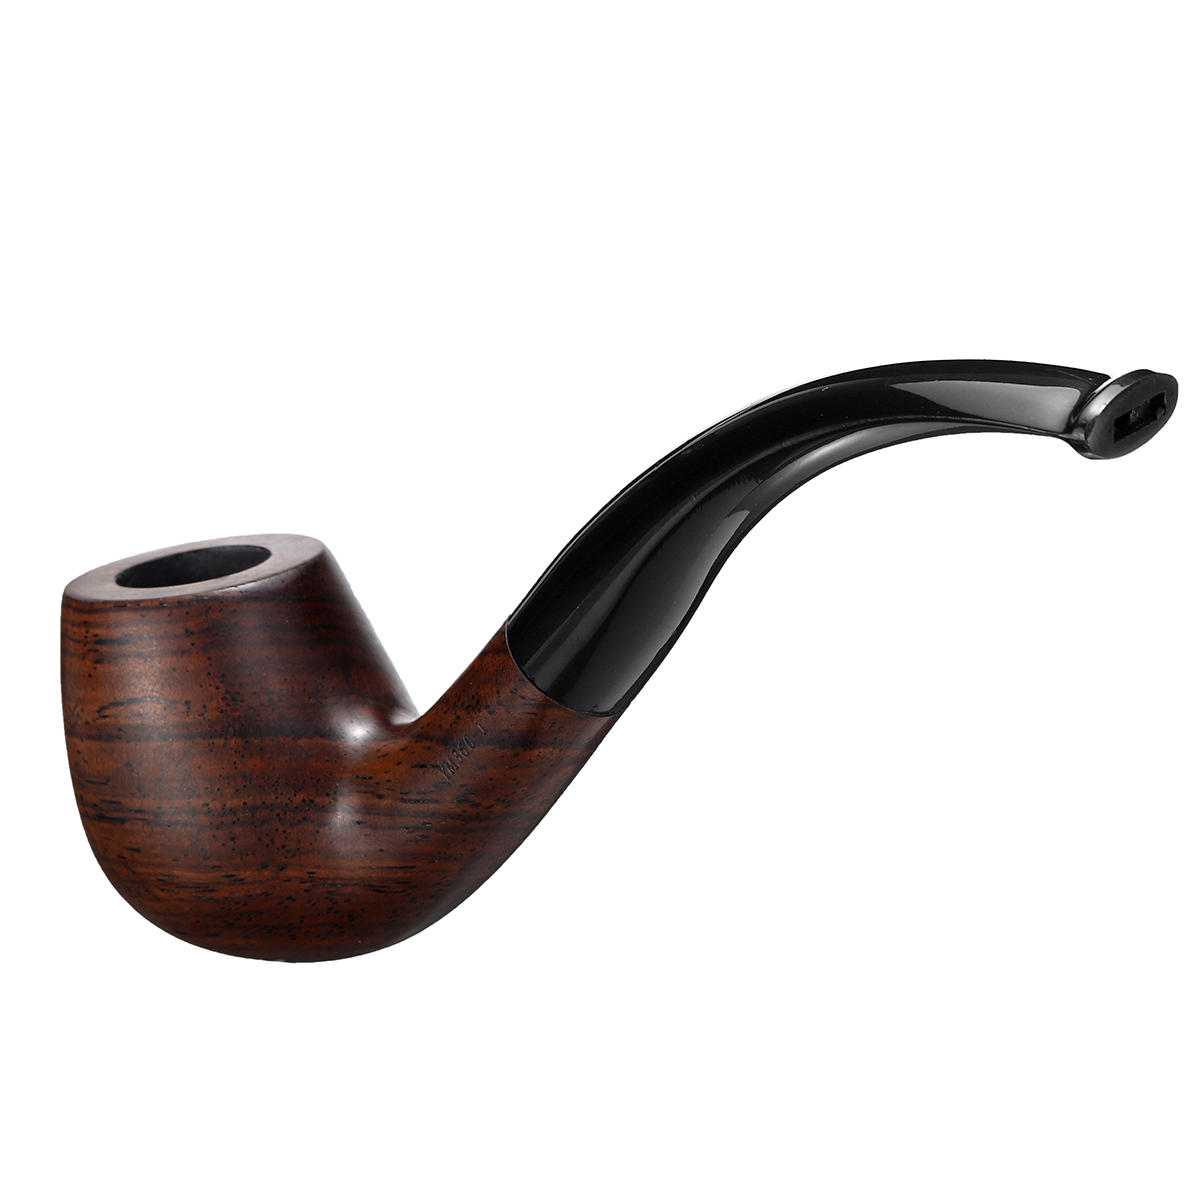 Ebony Wooden Long Handle CurvedMan High-ended Pipes Gift